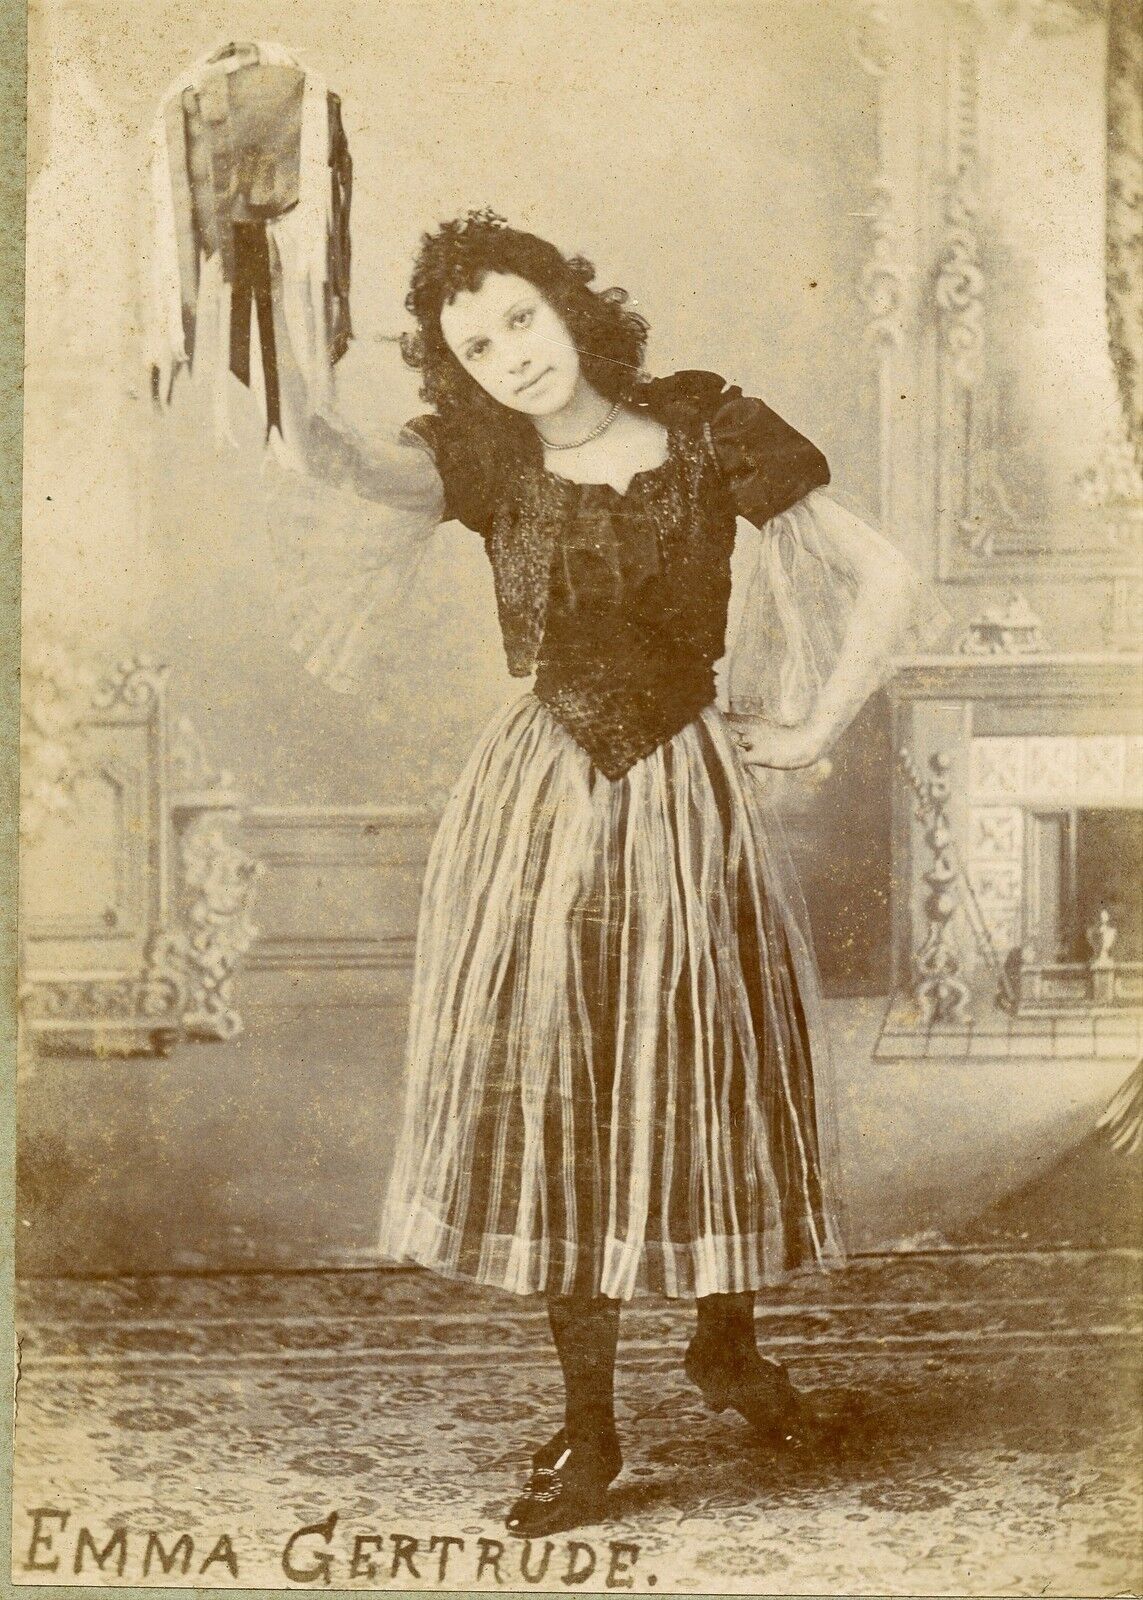 Emma Gertrude, Young Girl Dancing, Hat, Vintage Photo by Mertens, Stouffville ON